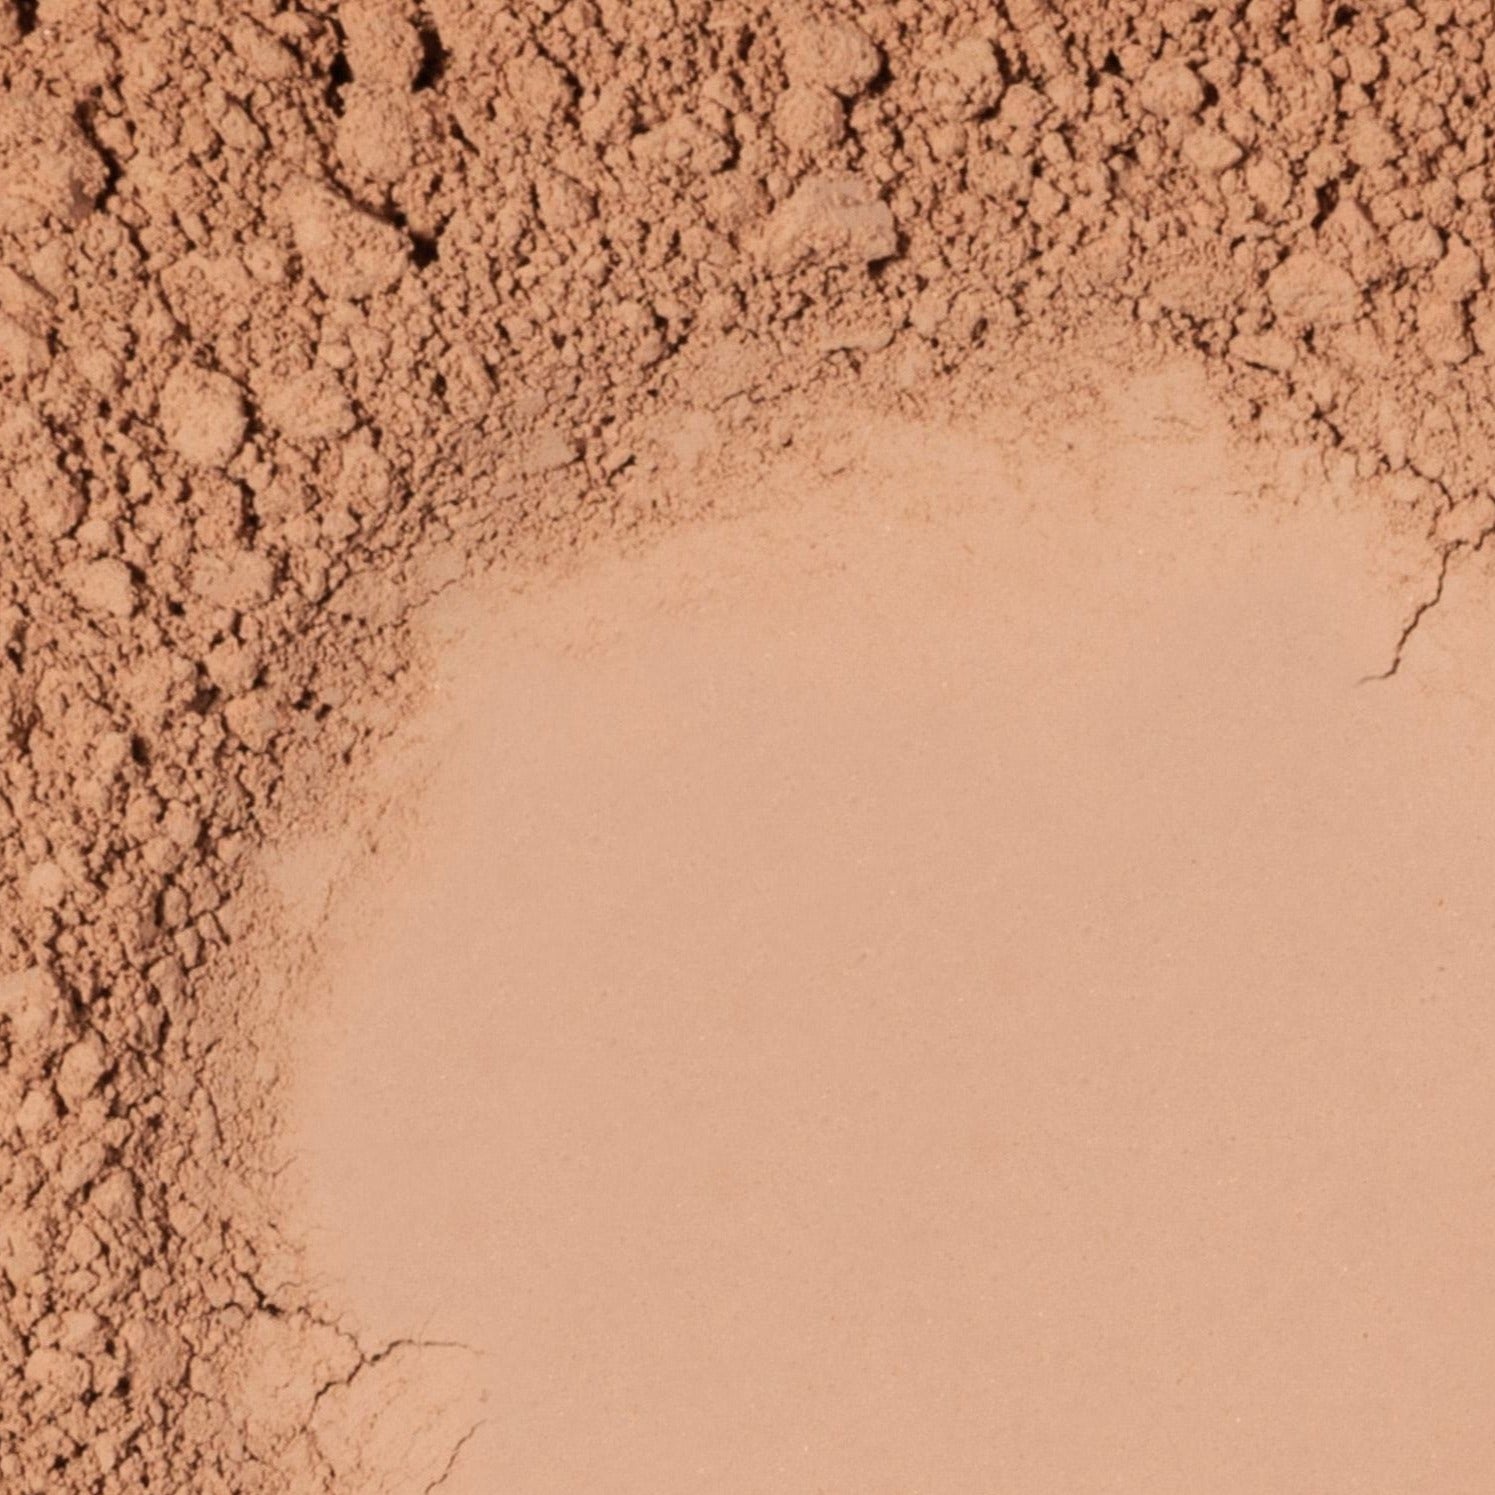 Witty - Omiana Loose Powder Mineral Foundation No Titanium Dioxide and No Mica